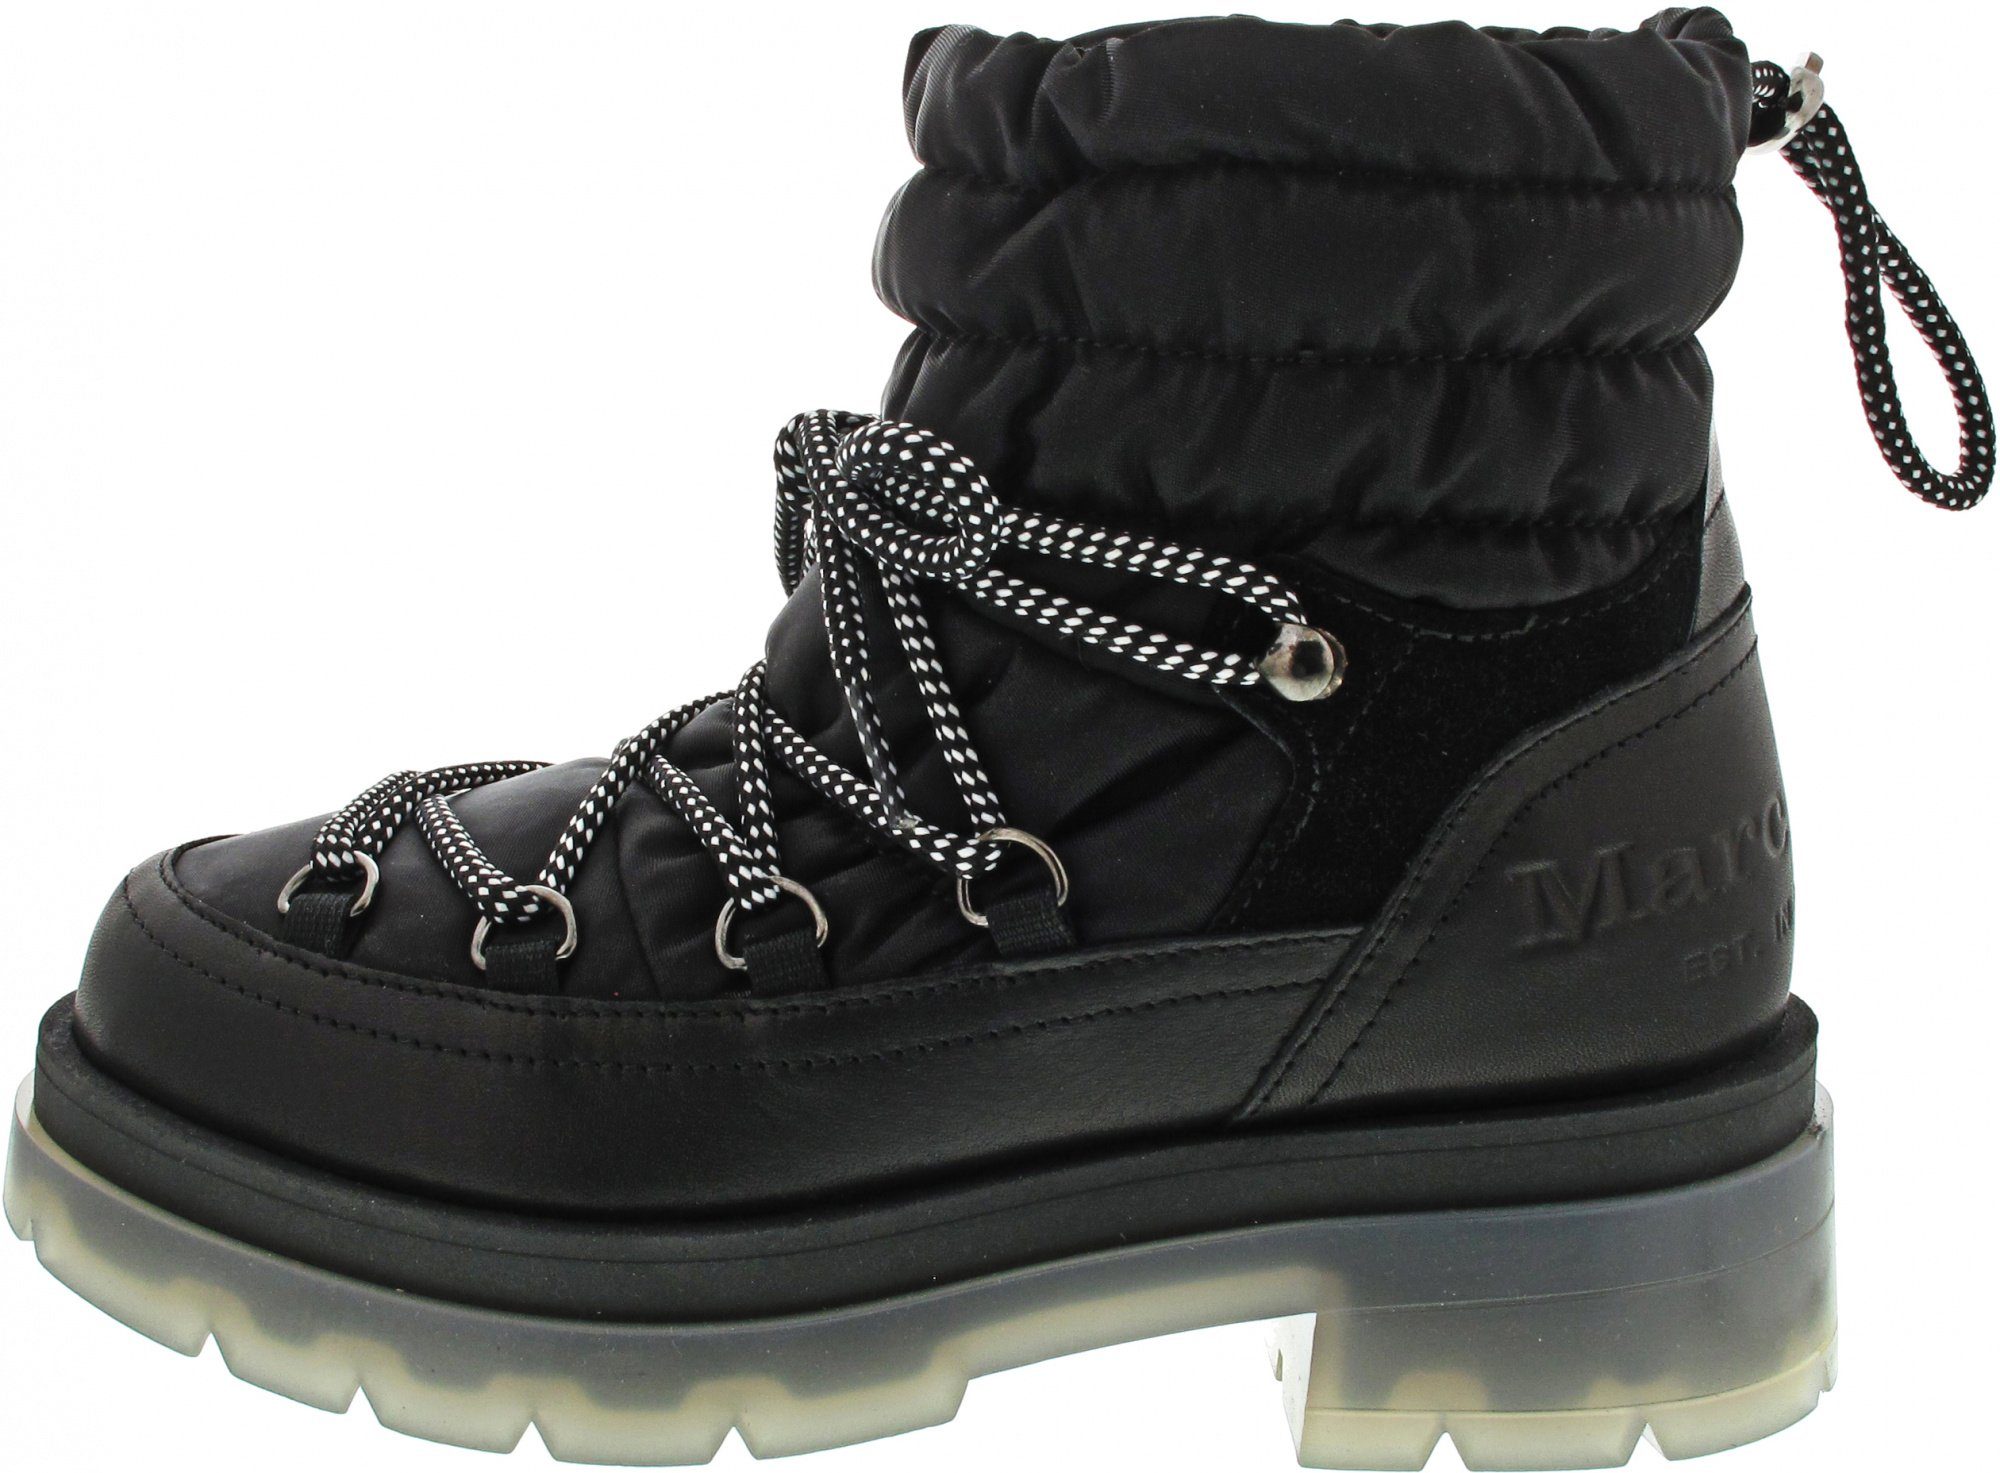 Marc O'Polo Short Winter Boot Winterboots